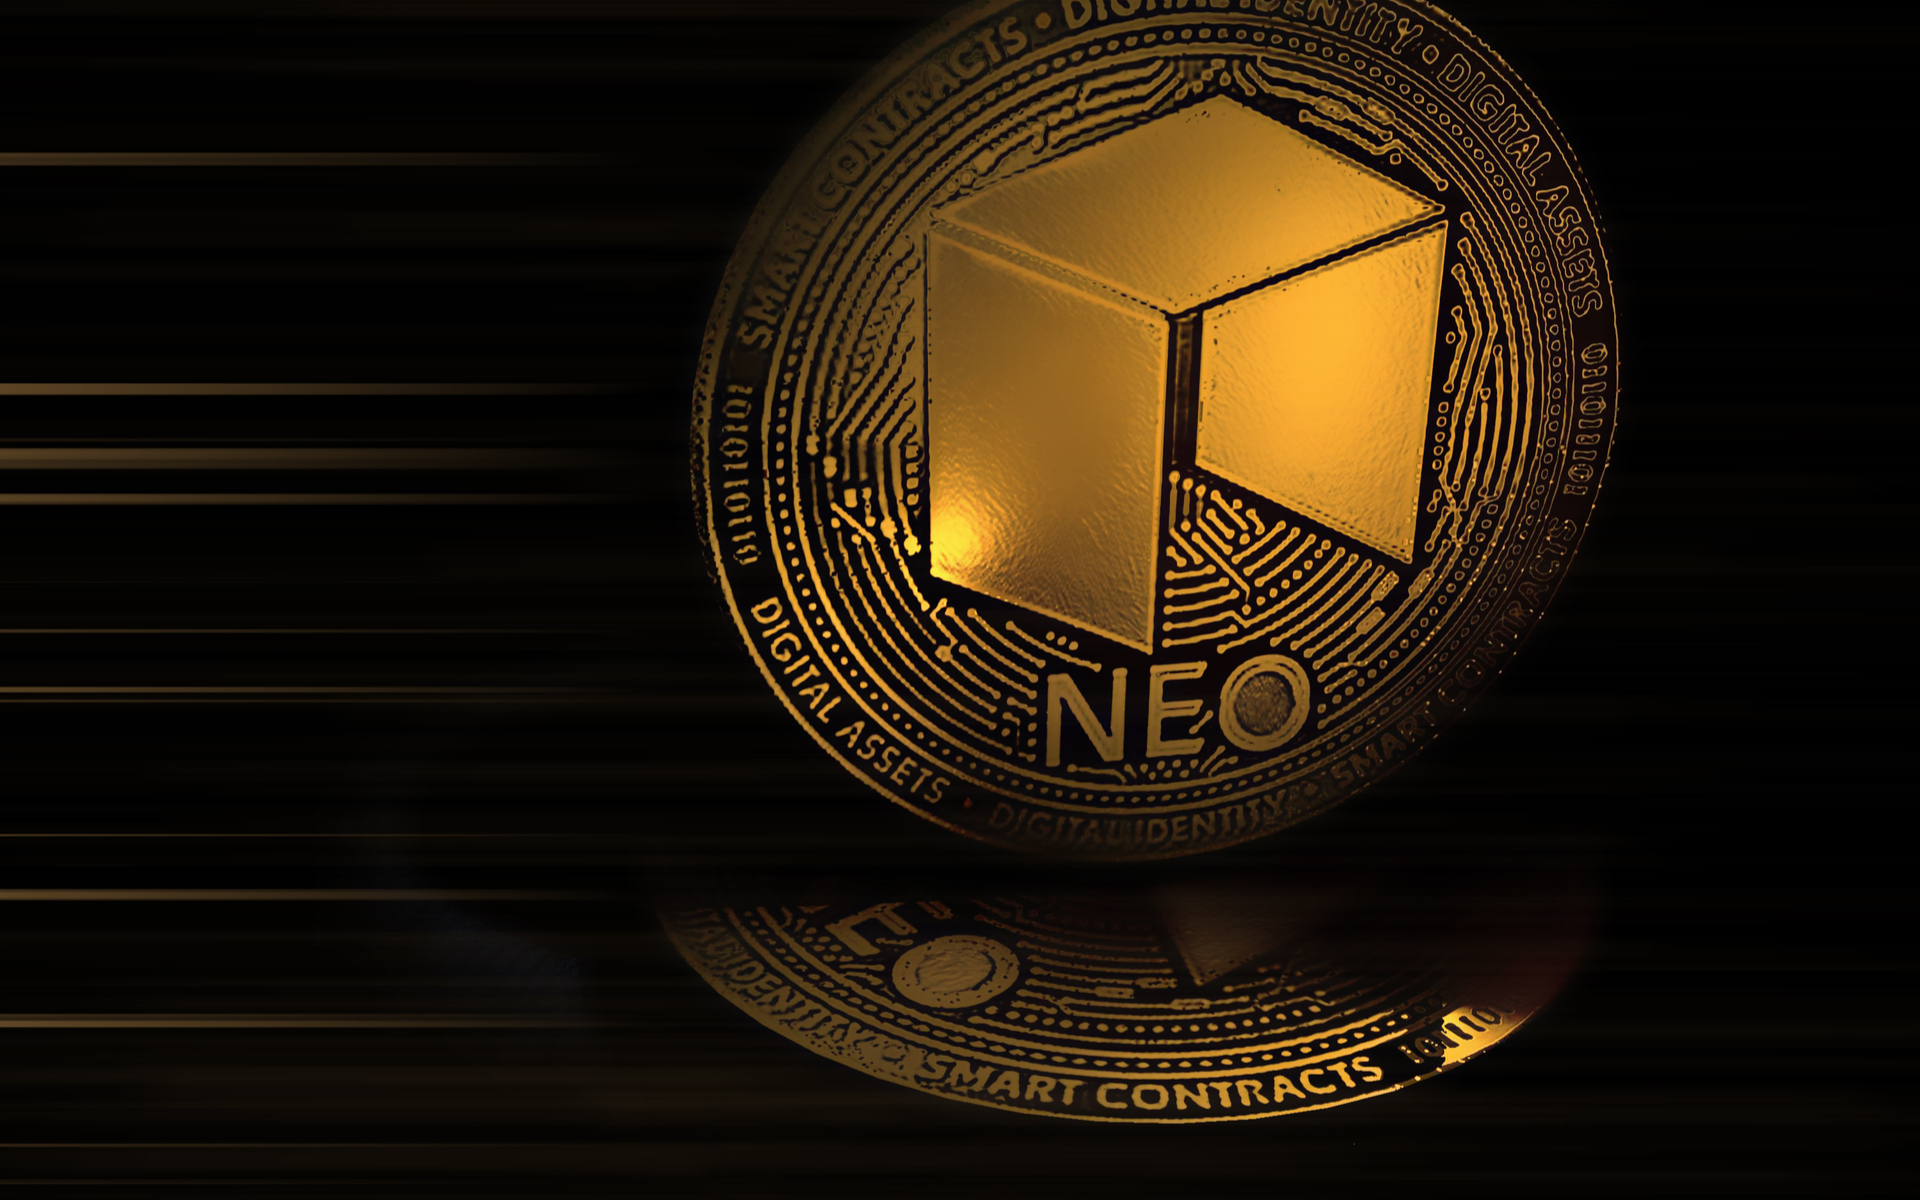 Buy neo cryptocurrency online cryptocurrency for purchase of goods